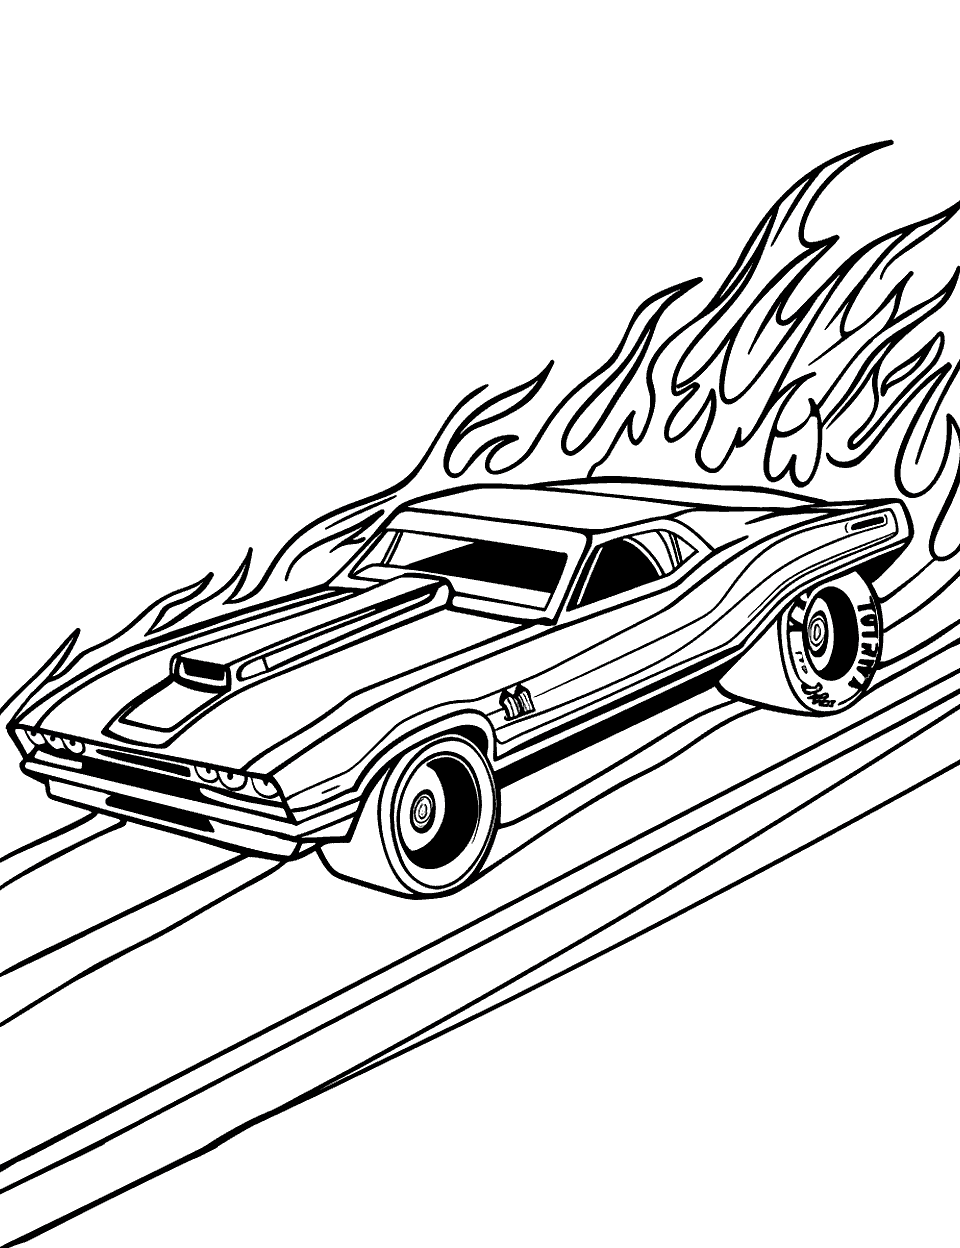 Hot Wheels Showdown Coloring Page - A Hot Wheel car speeding down a straight race track with flames trailing behind.